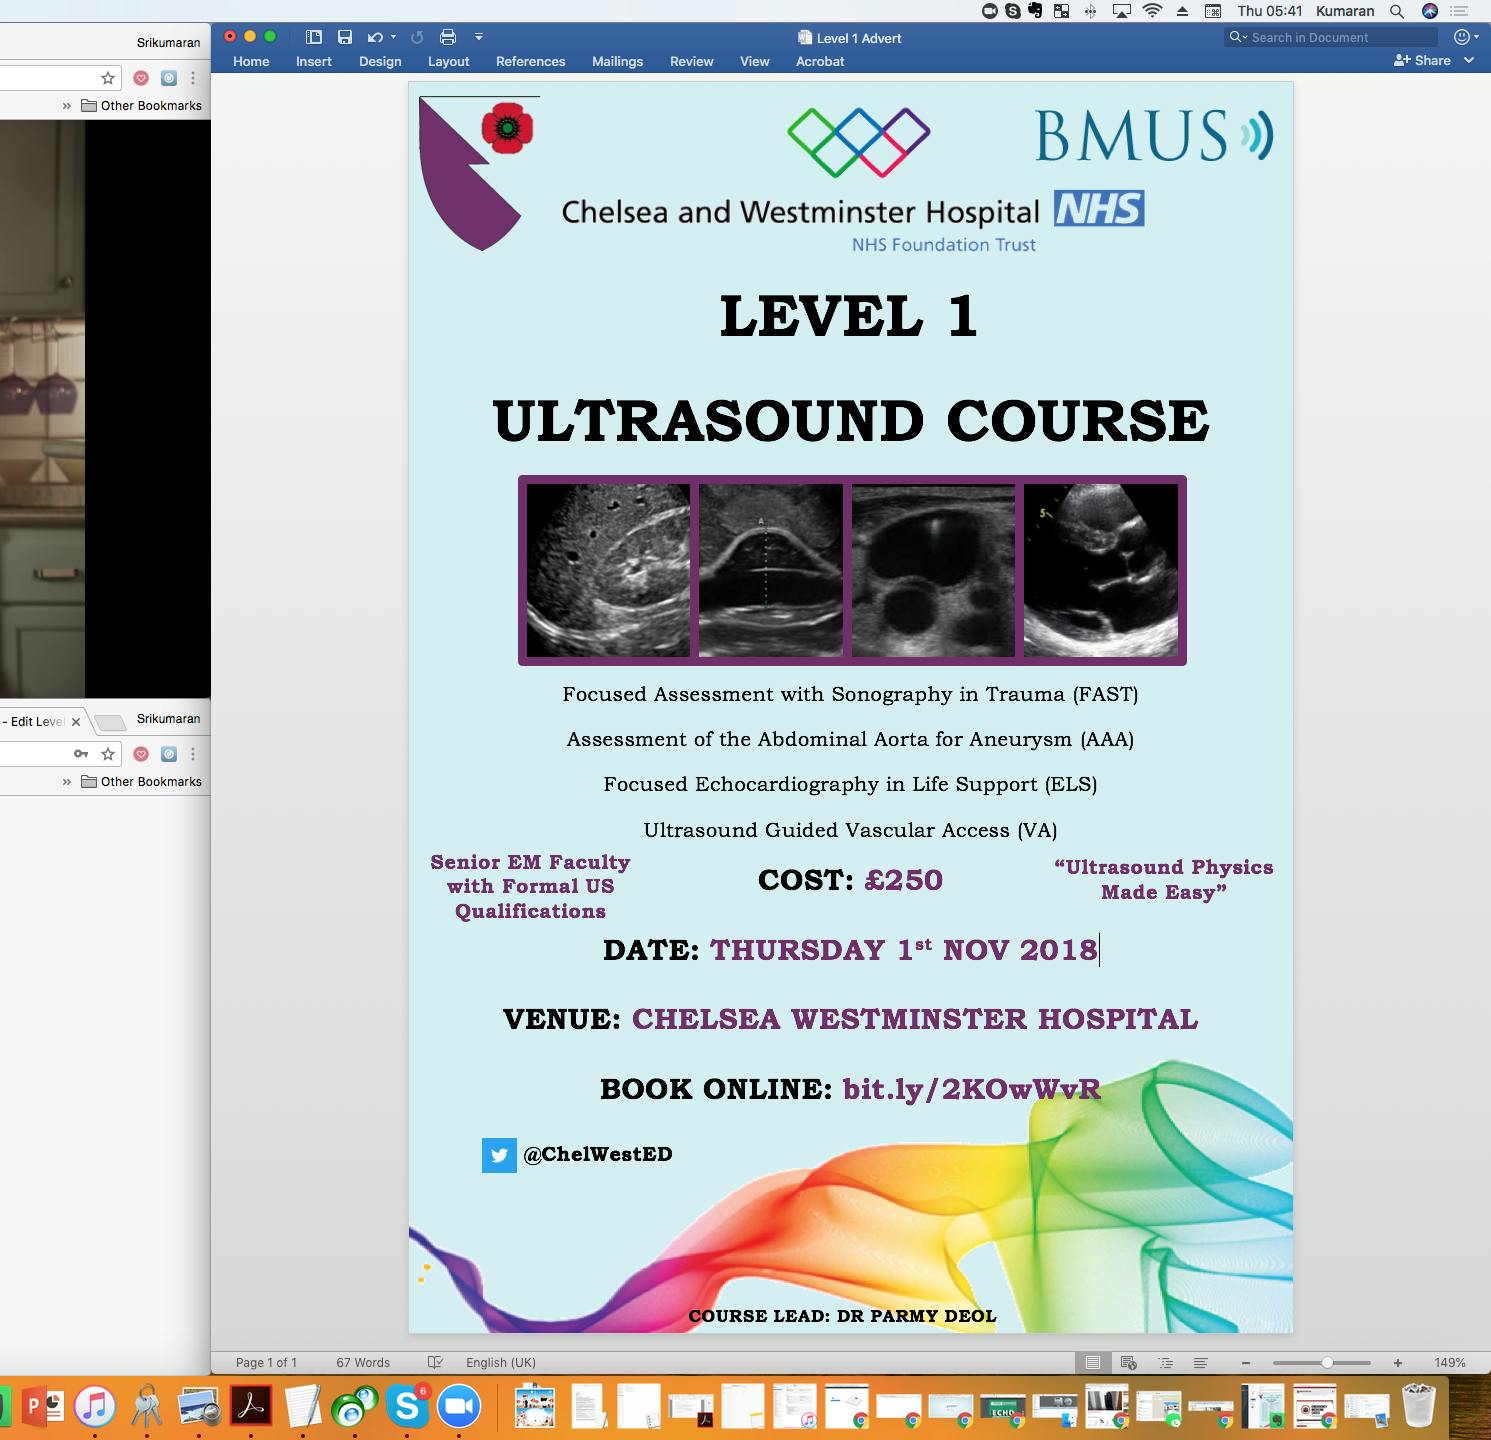 Level 1 Ultrasound Course